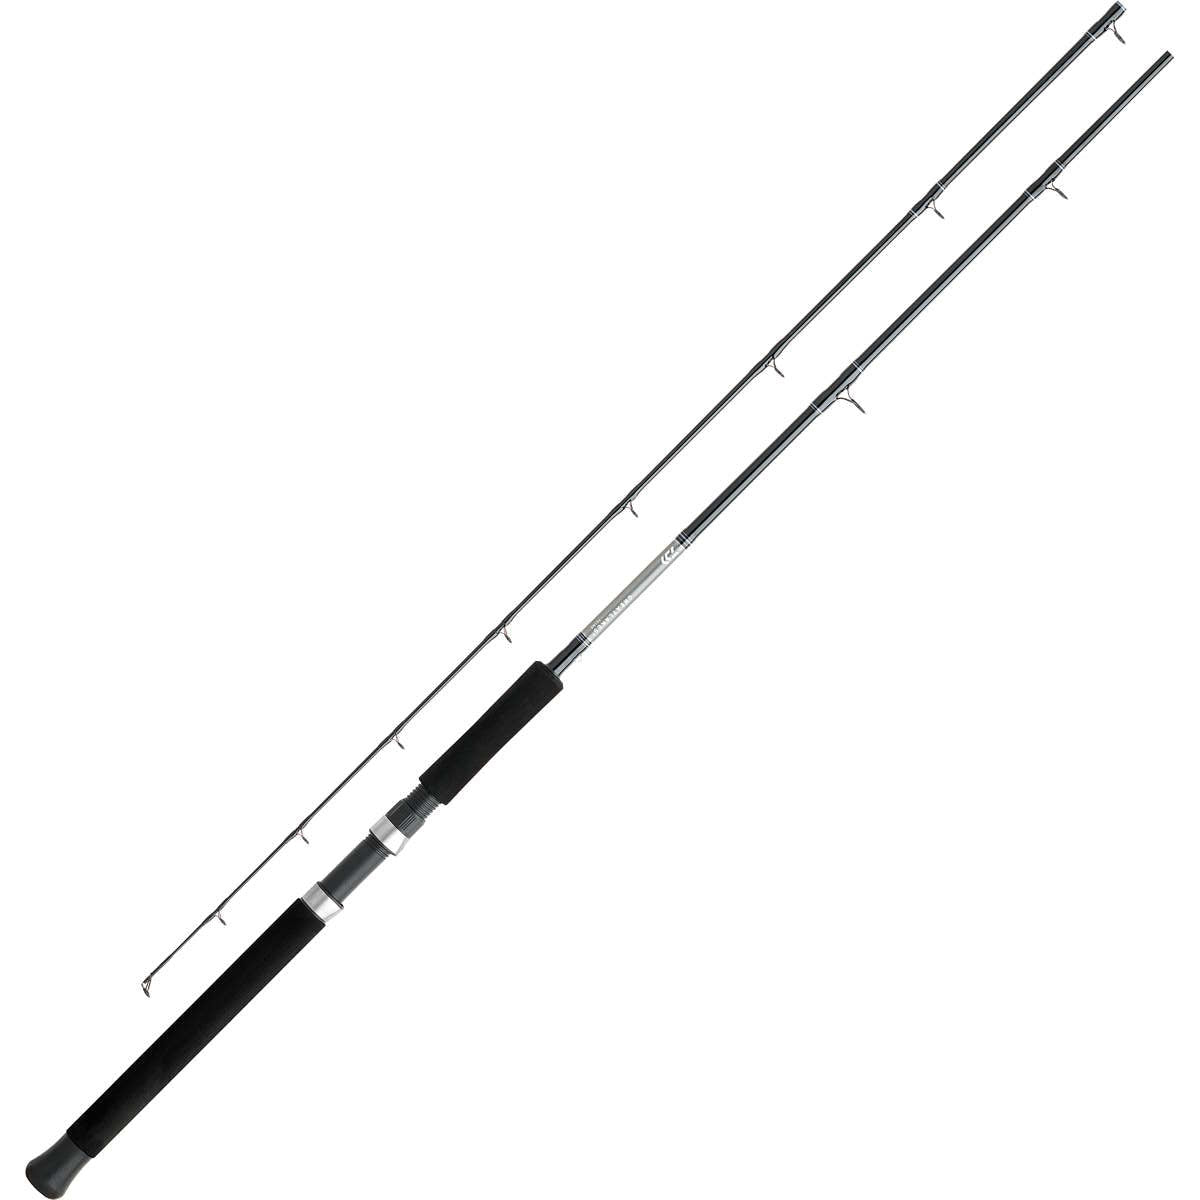 Photo of Daiwa Great Lakes Specialty Series Downrigger/Planar Board Rod for sale at United Tackle Shops.